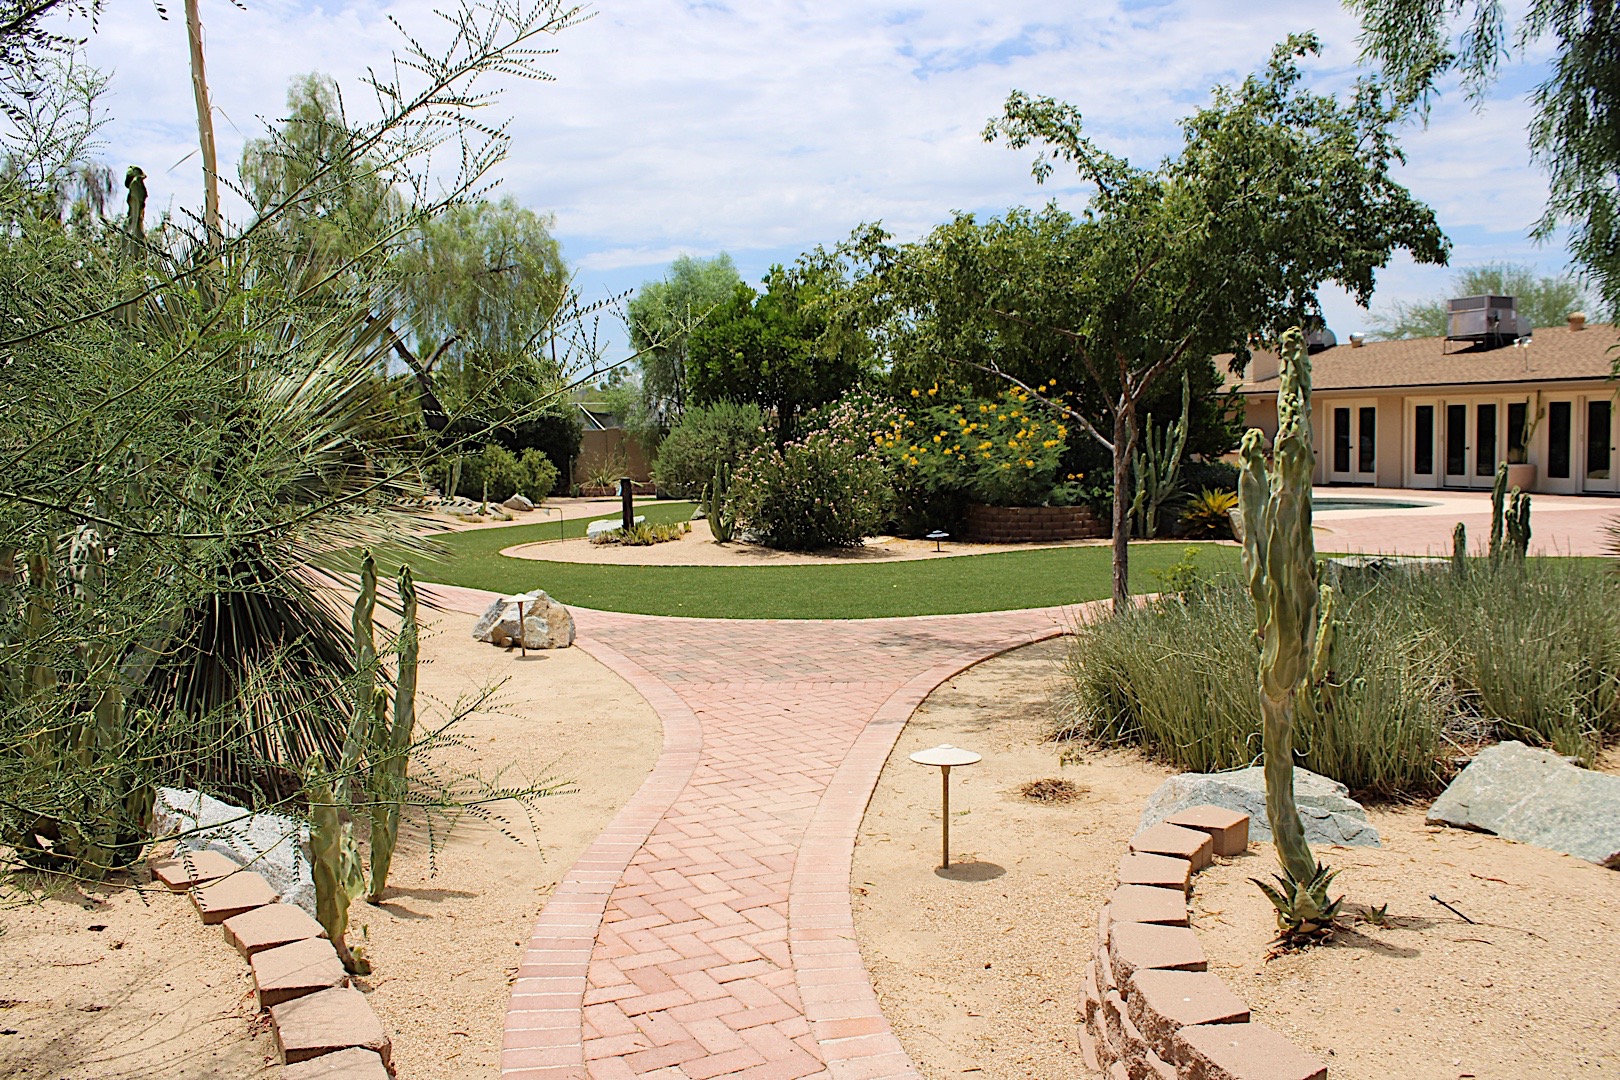 Walking paths throughout the property to view the wonderful landscaping